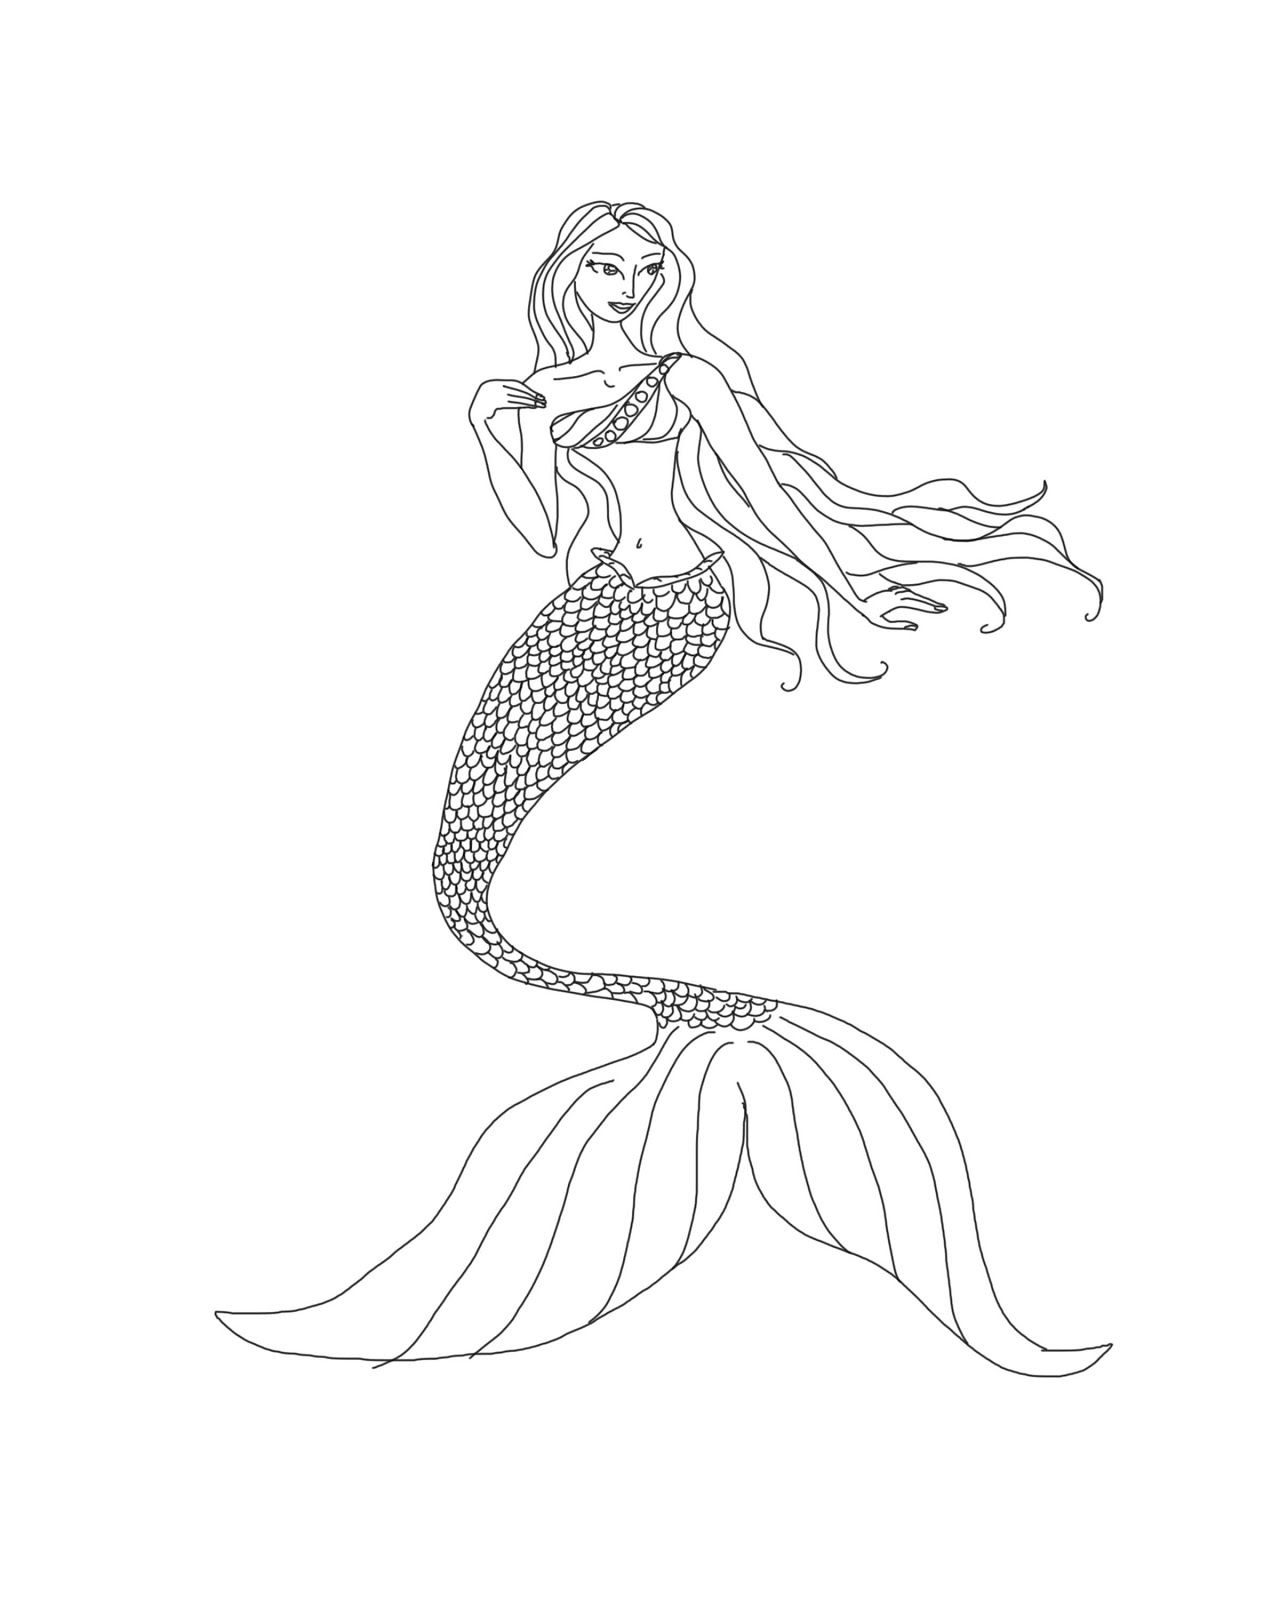 Printable Realistic Mermaid Coloring Pages - High Quality Coloring ...